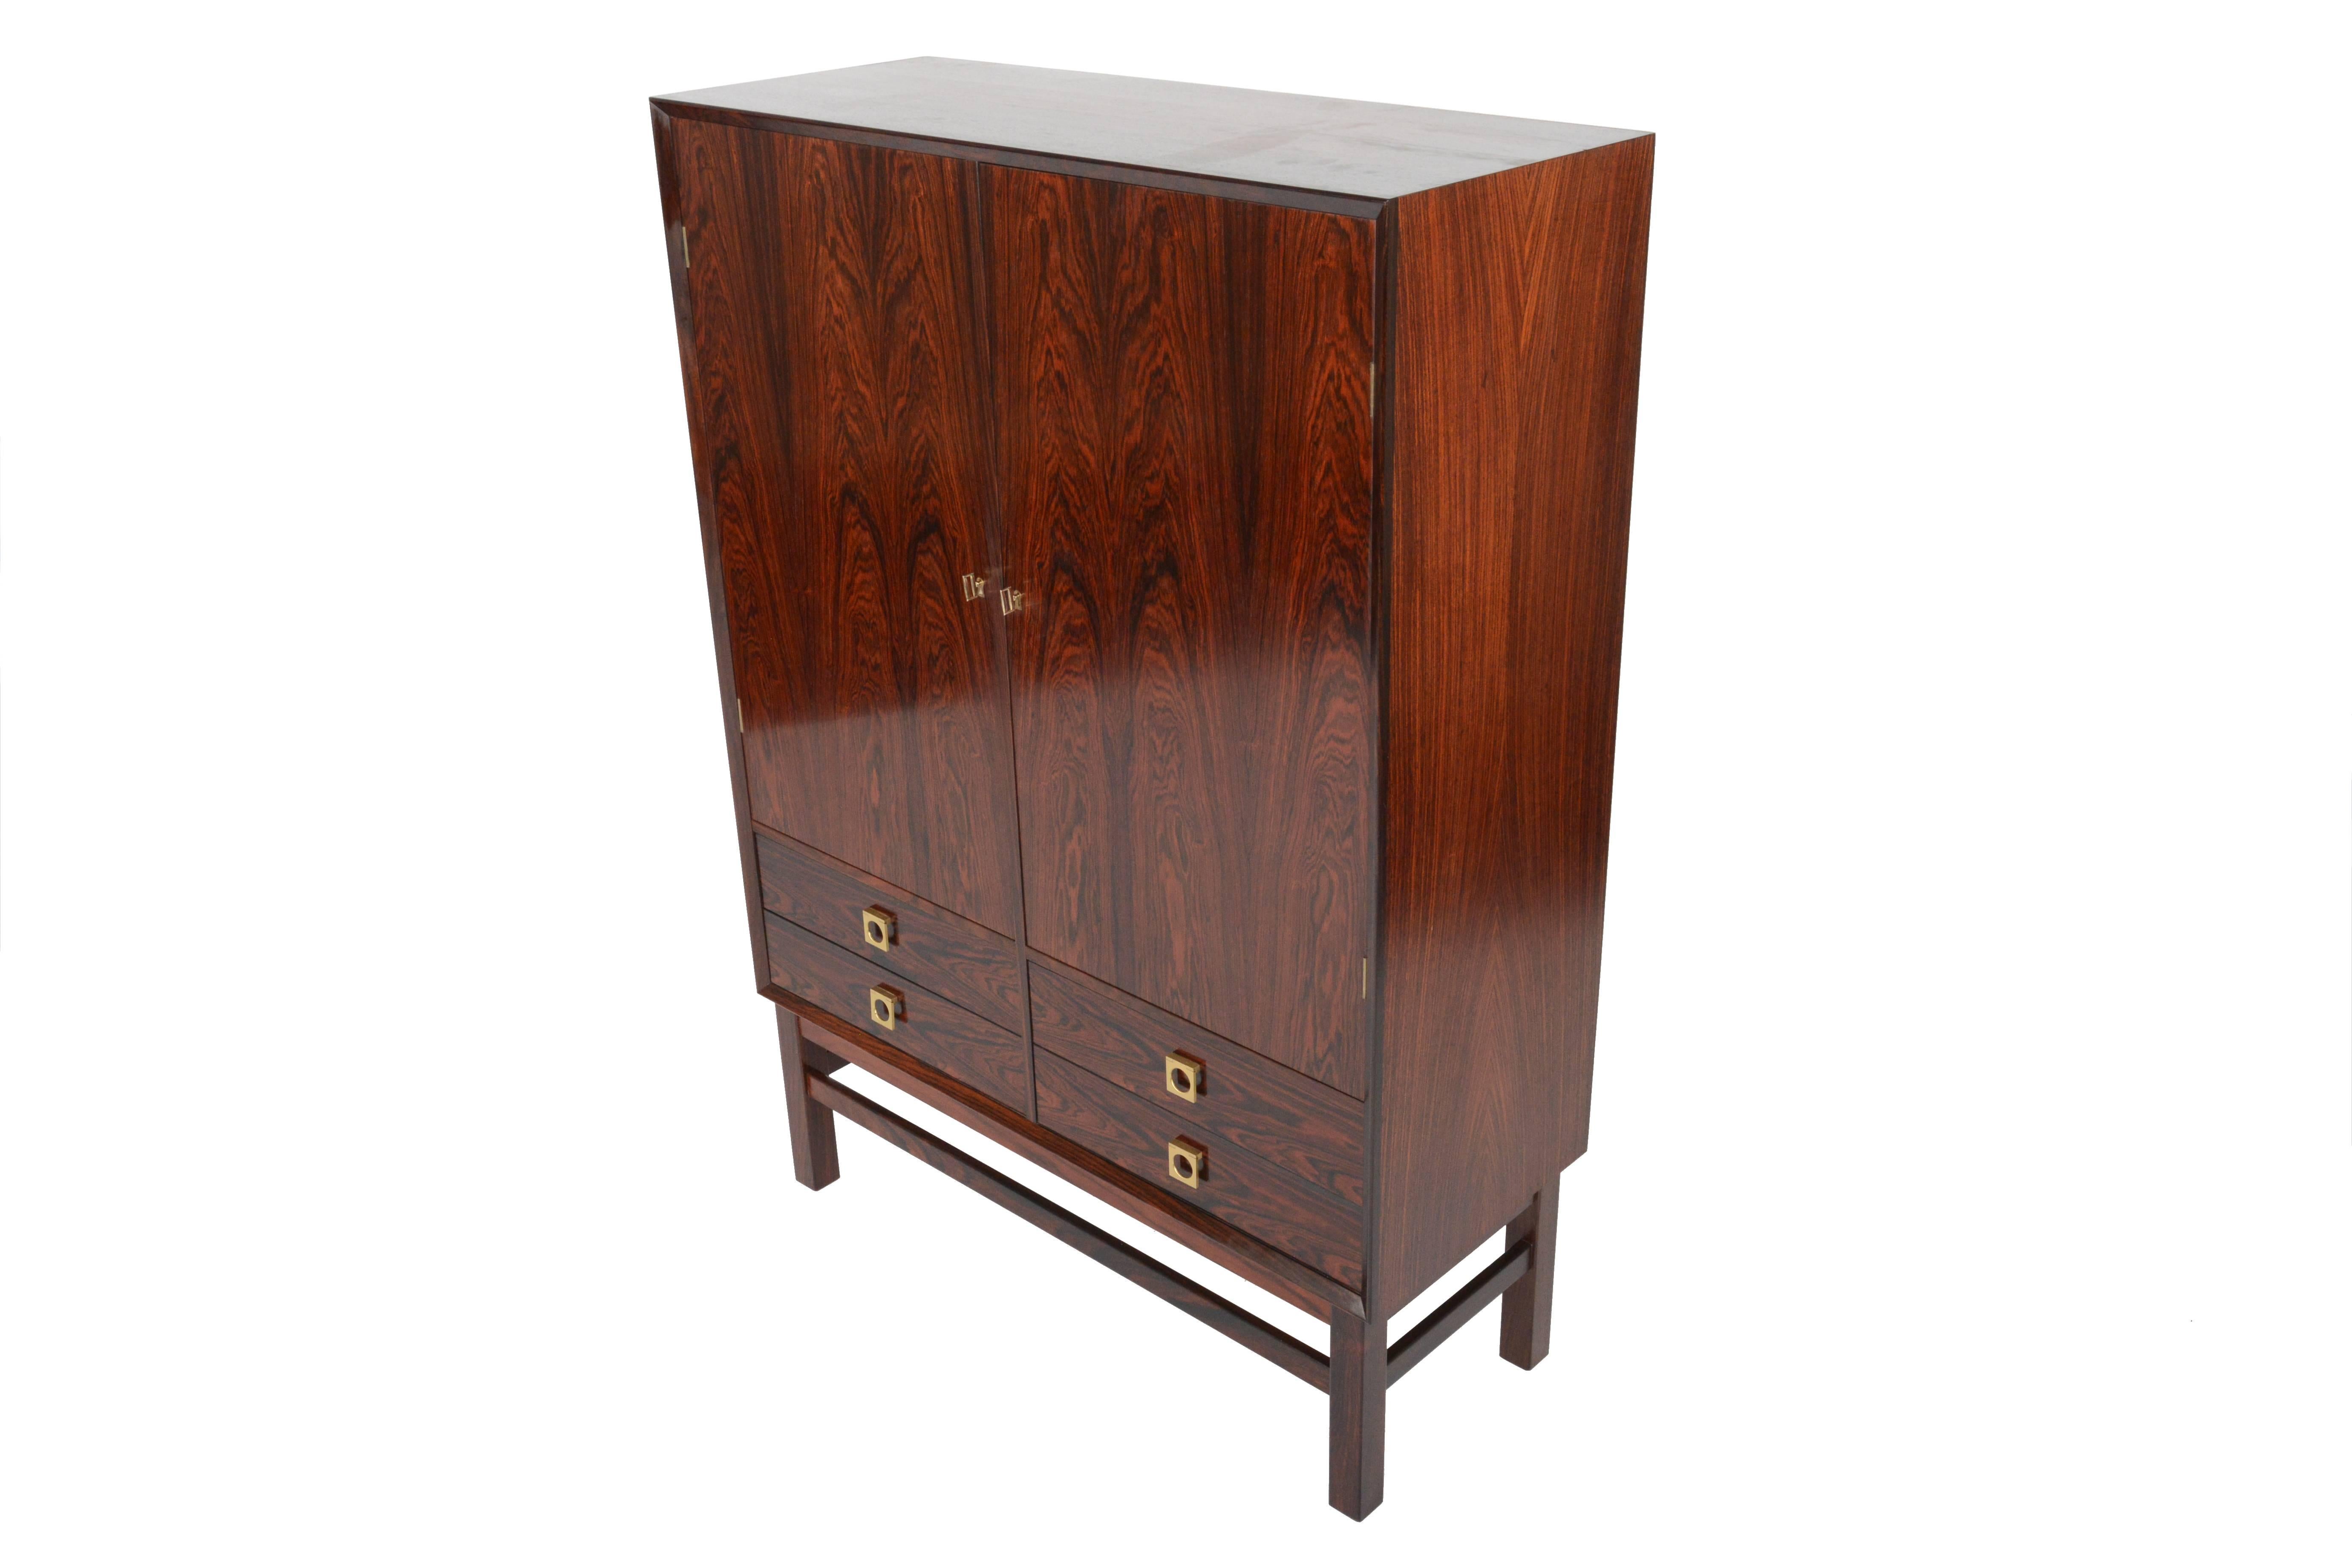 This fantastic Danish modern tall credenza by Brouer Møbelfabrik offers fantastic rosewood wood grain and superior craftsmanship throughout! Two locking doors open to reveal two bays with adjustable shelving. Four lower drawers provide additional